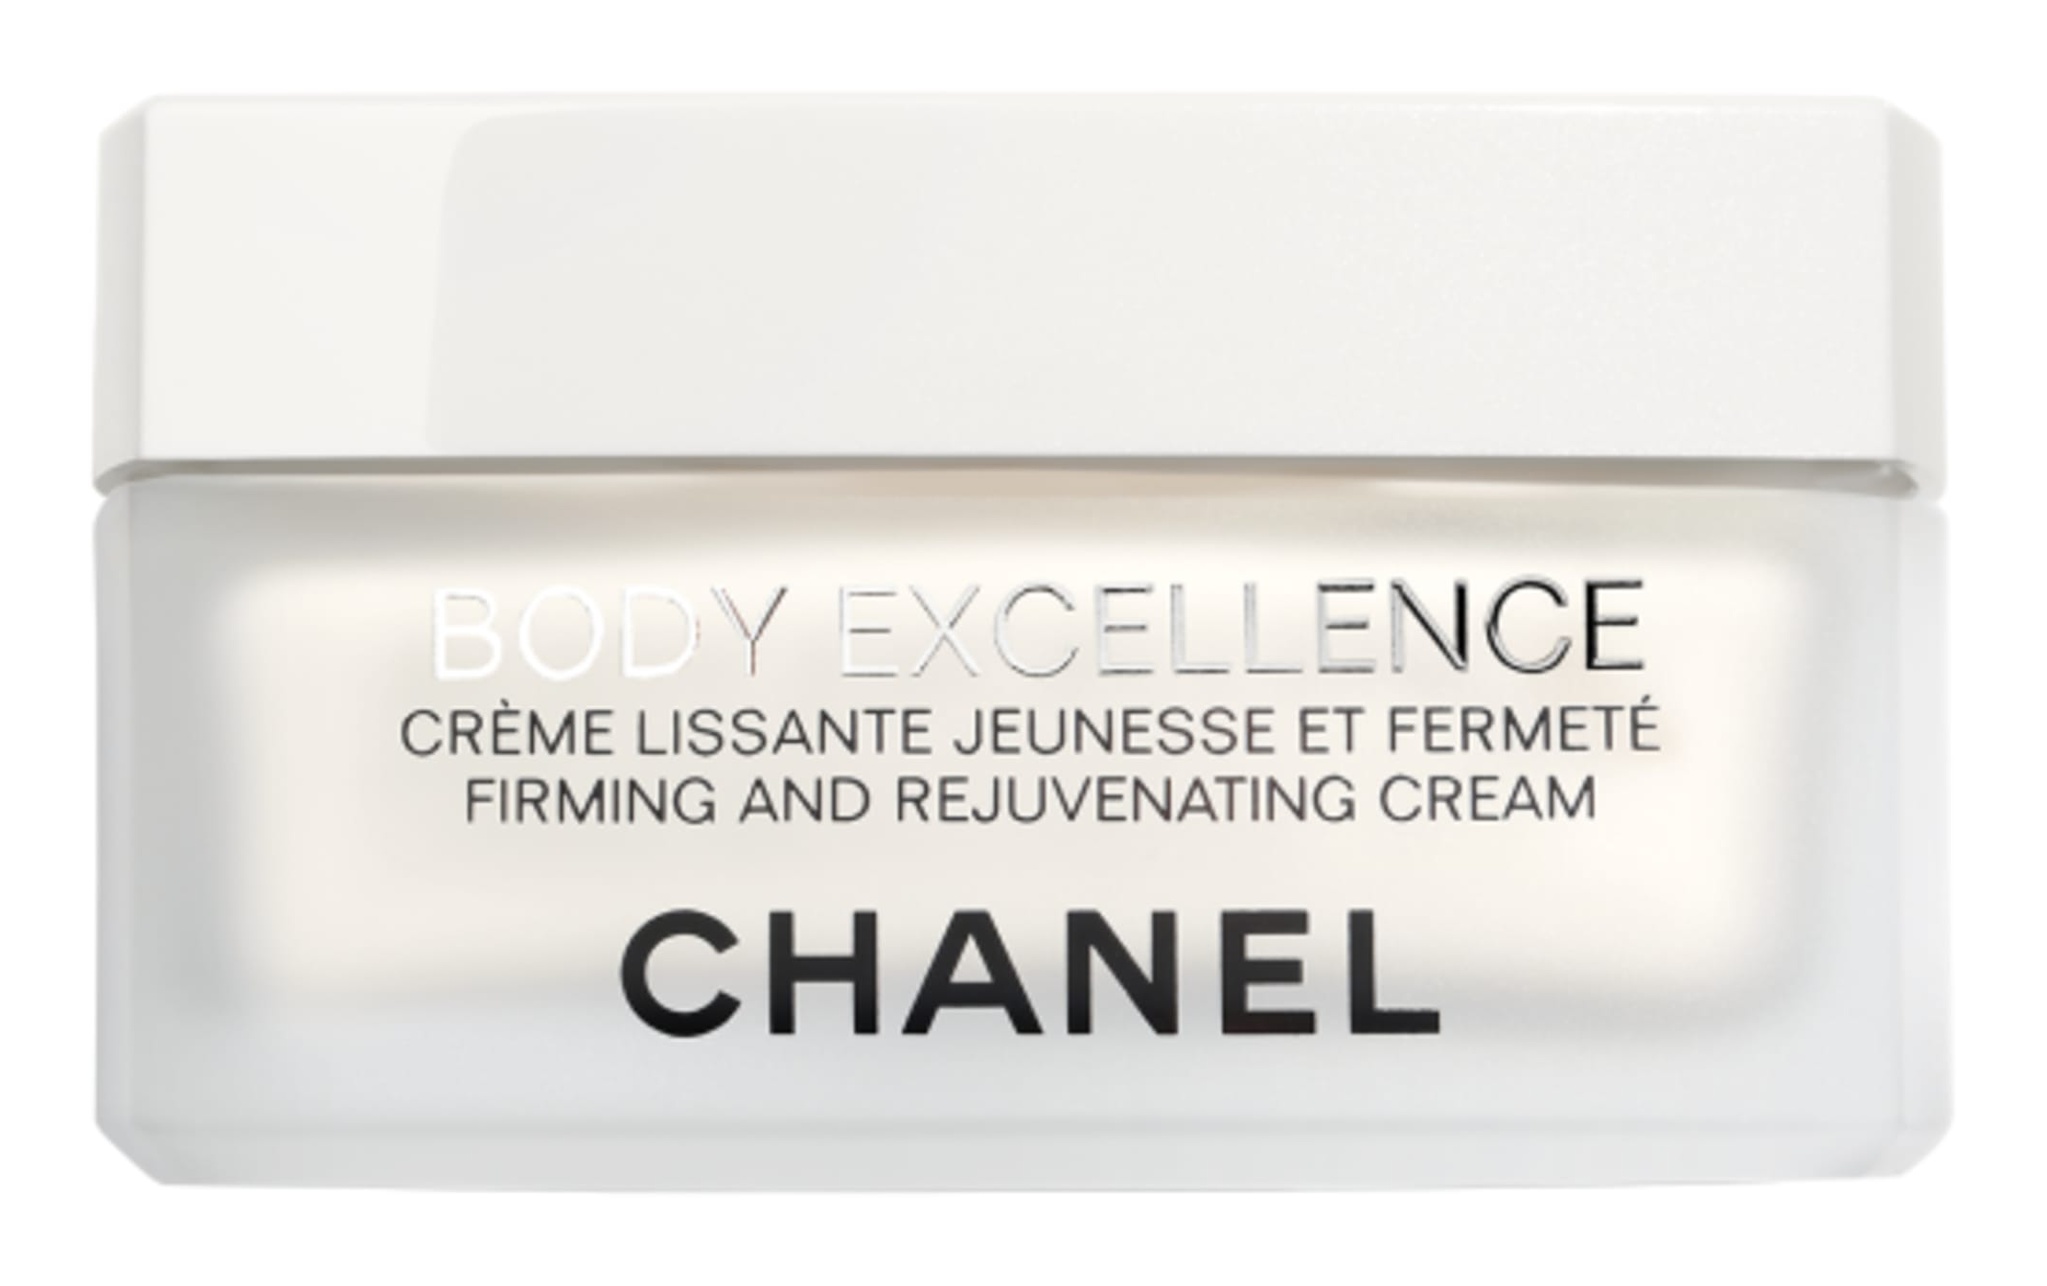 Chanel Body Excellence Firming and Rejuvenating Cream